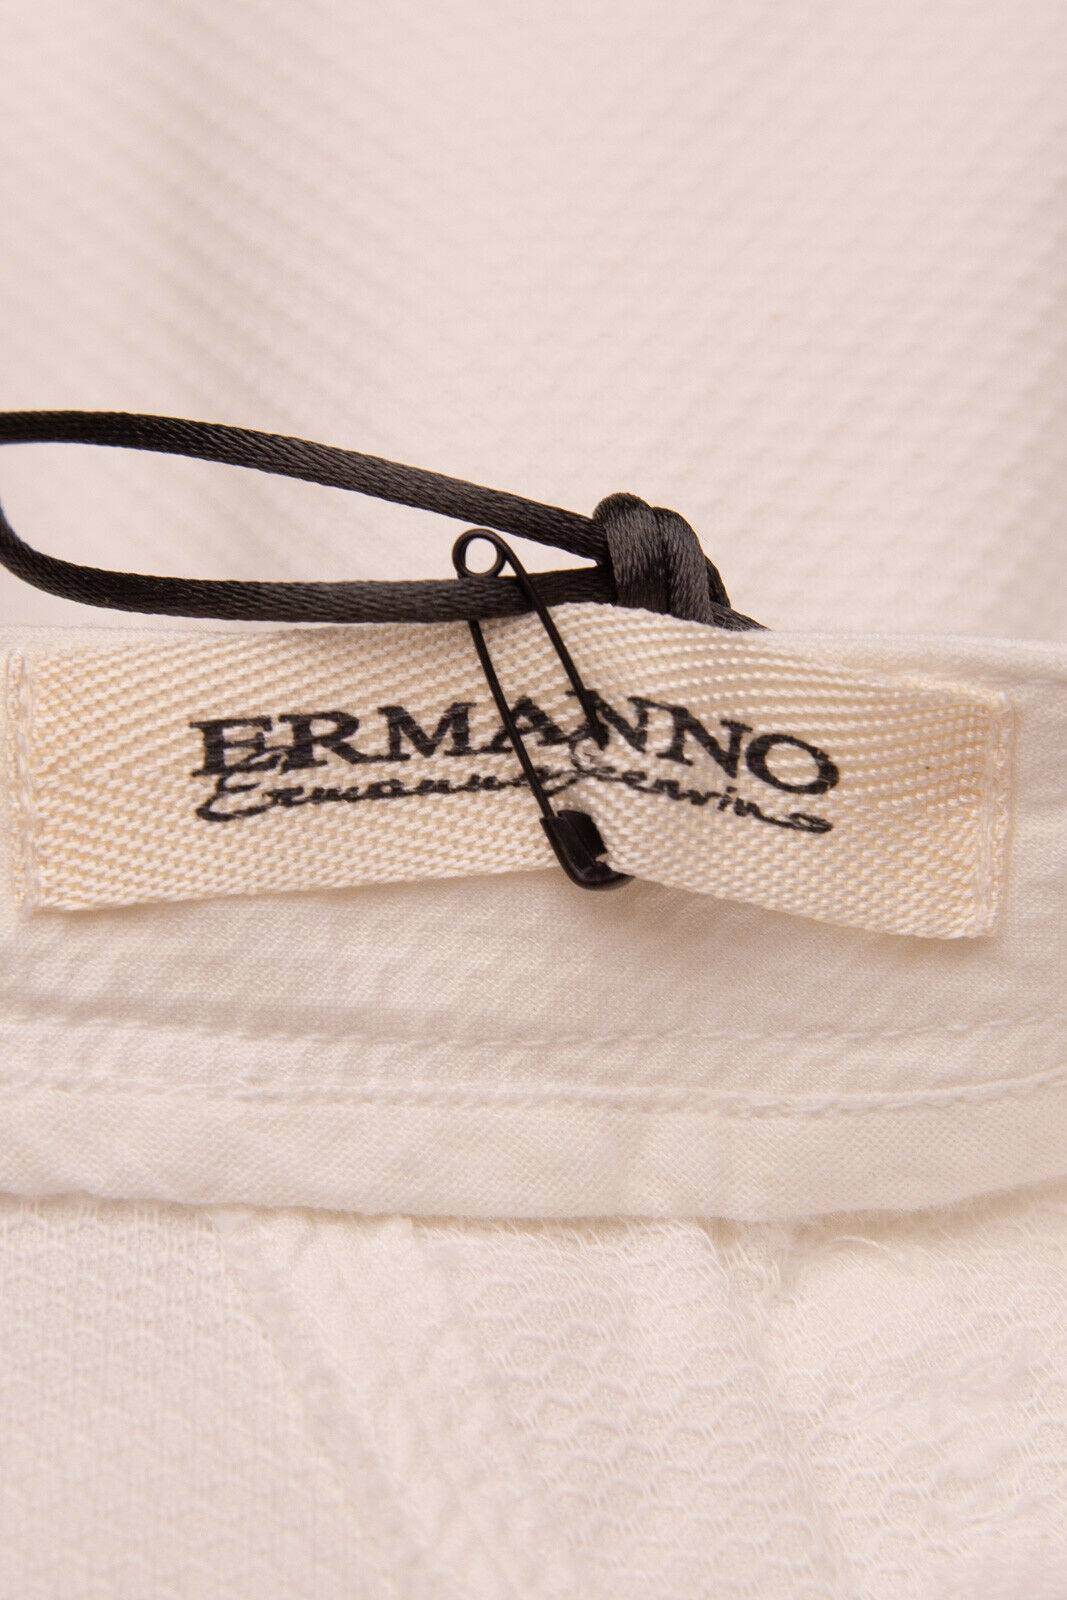 ERMANNO SCERVINO Mini Skirt Size XS Made in Italy